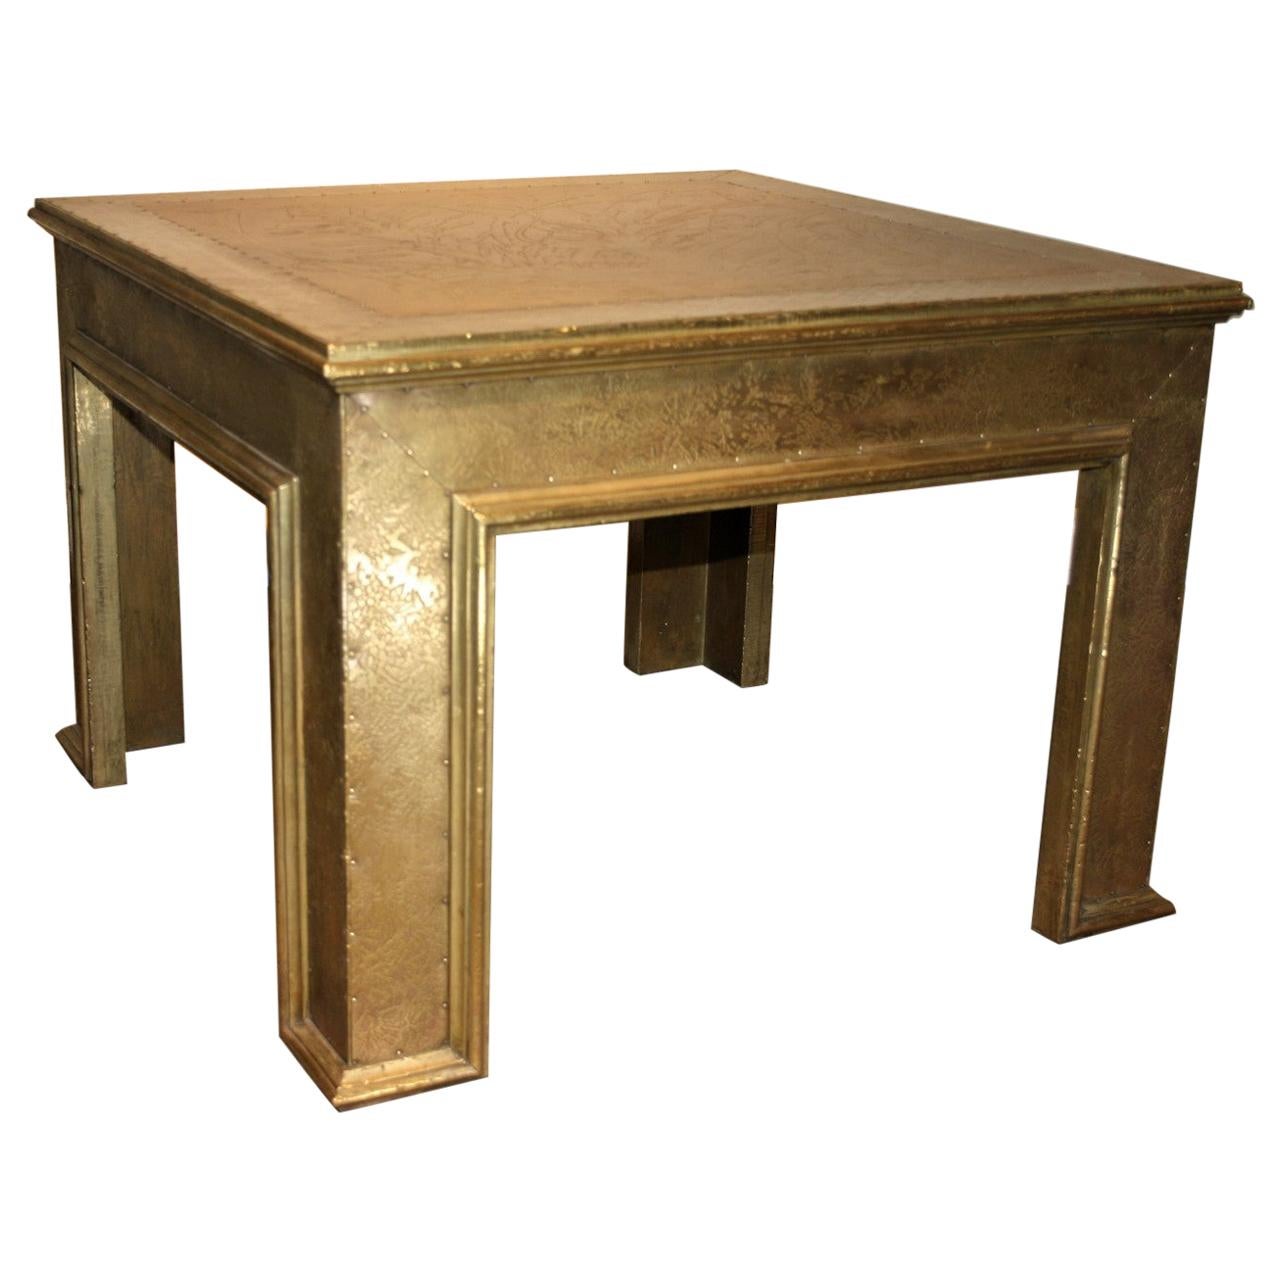 Spanish Midcentury Brass Coffee Table For Sale